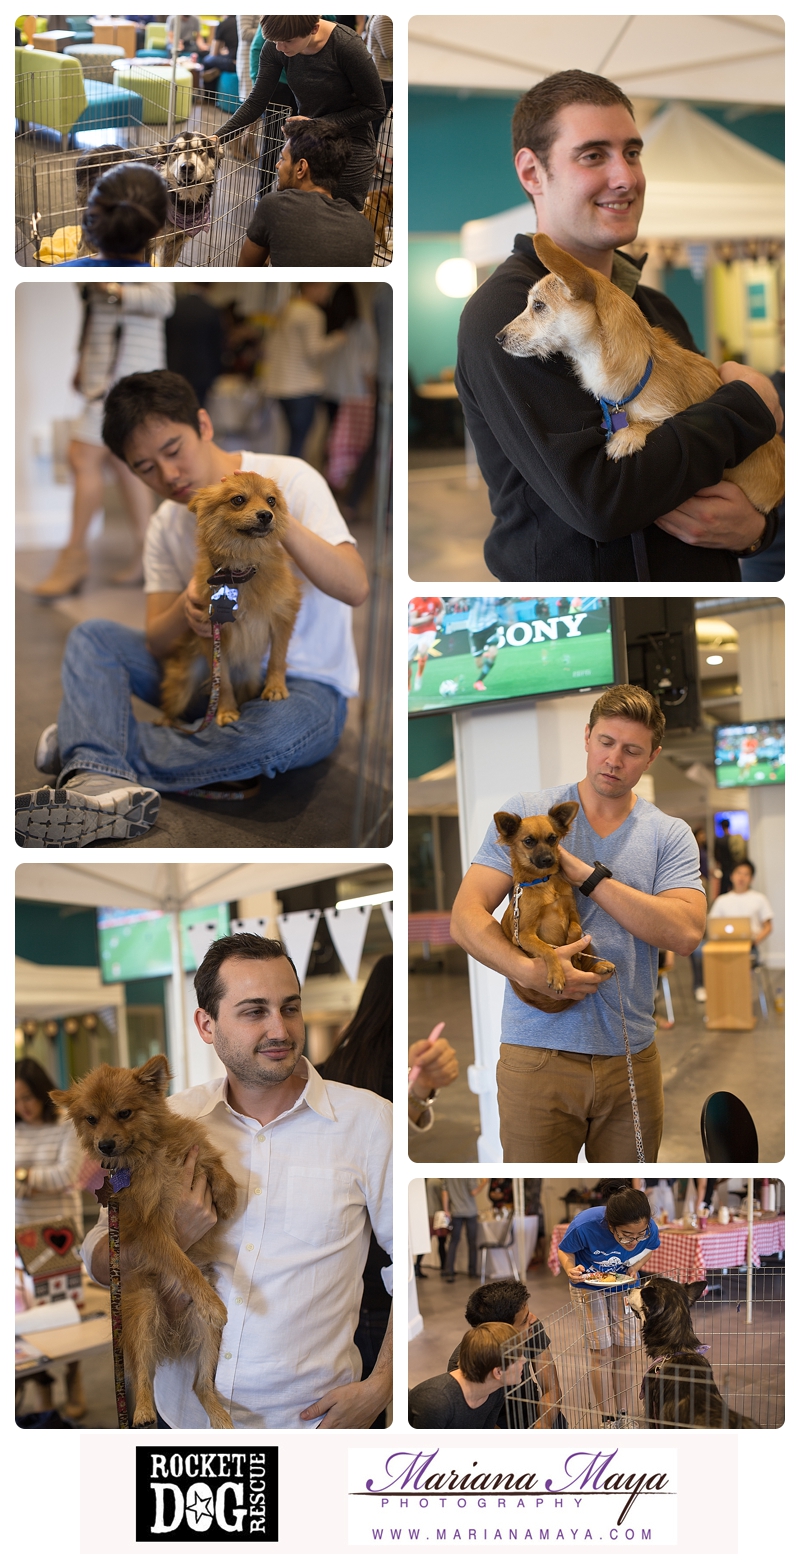 yammer employees at a Rocket Dog Rescue adoption event